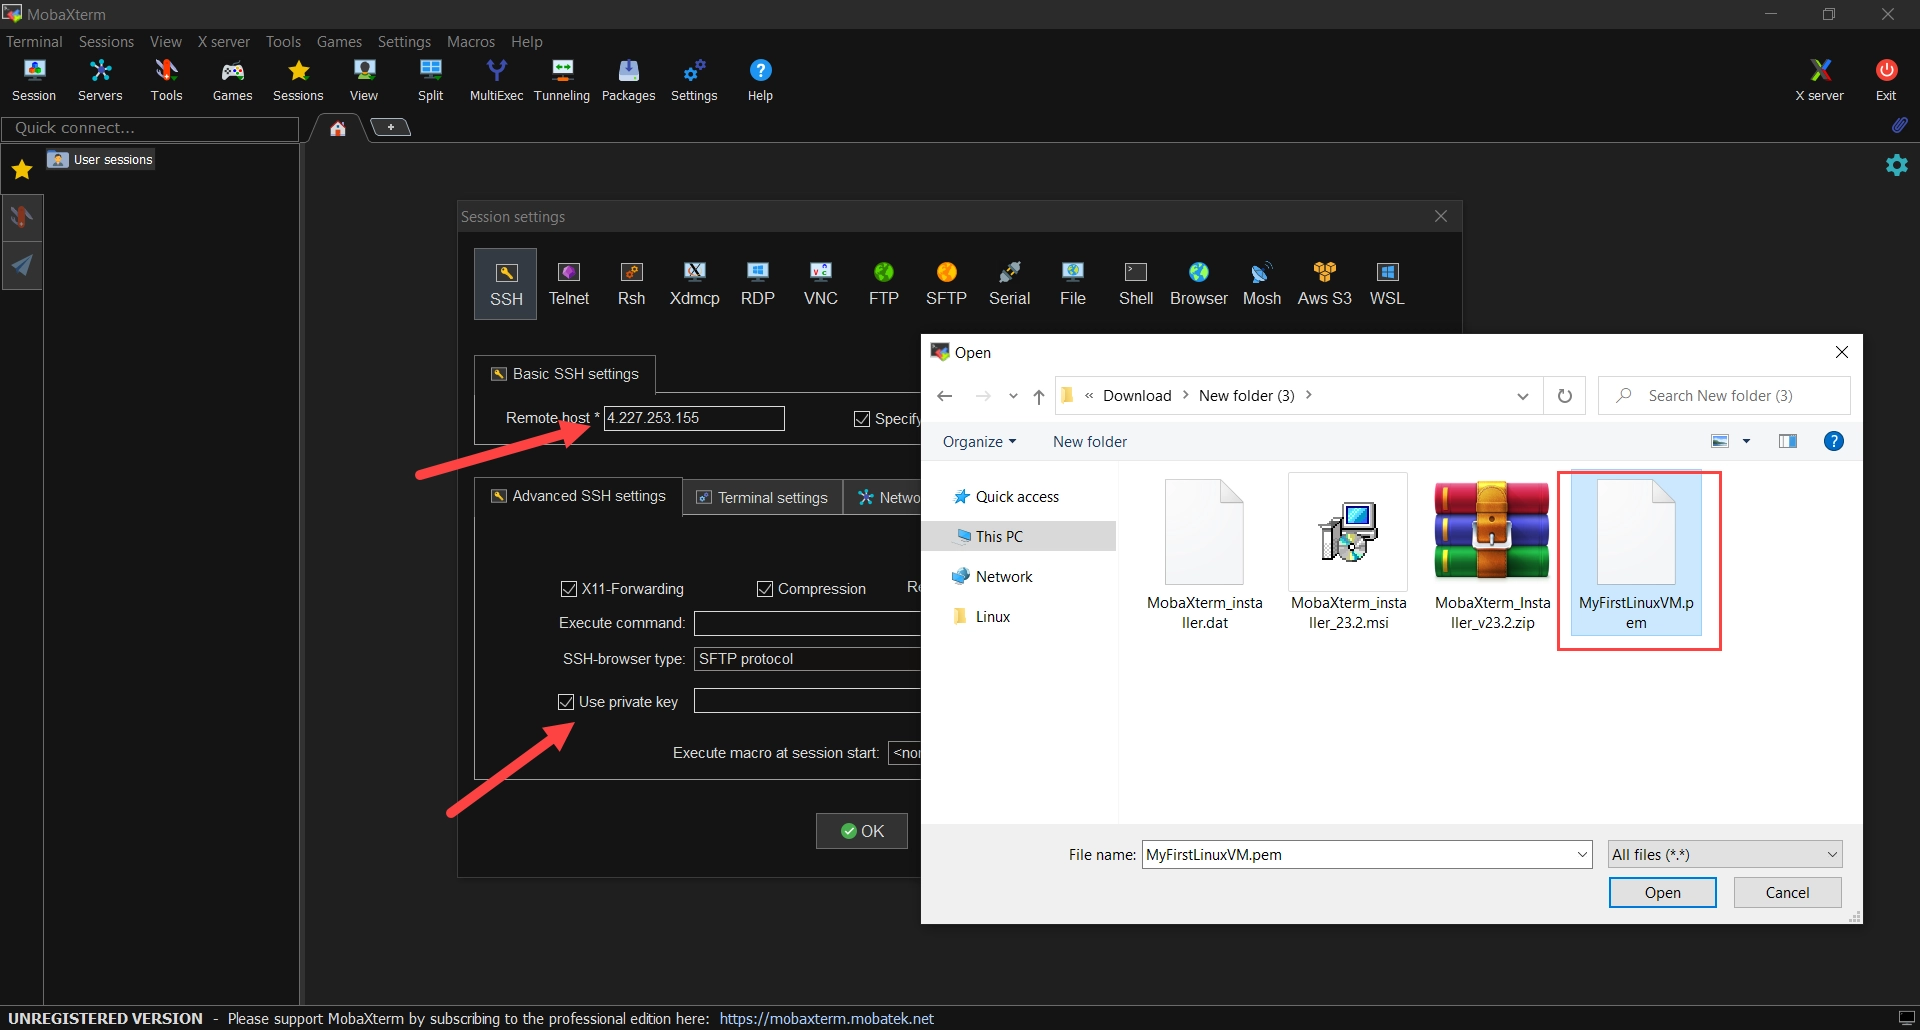 how to connect azure vm using ssh